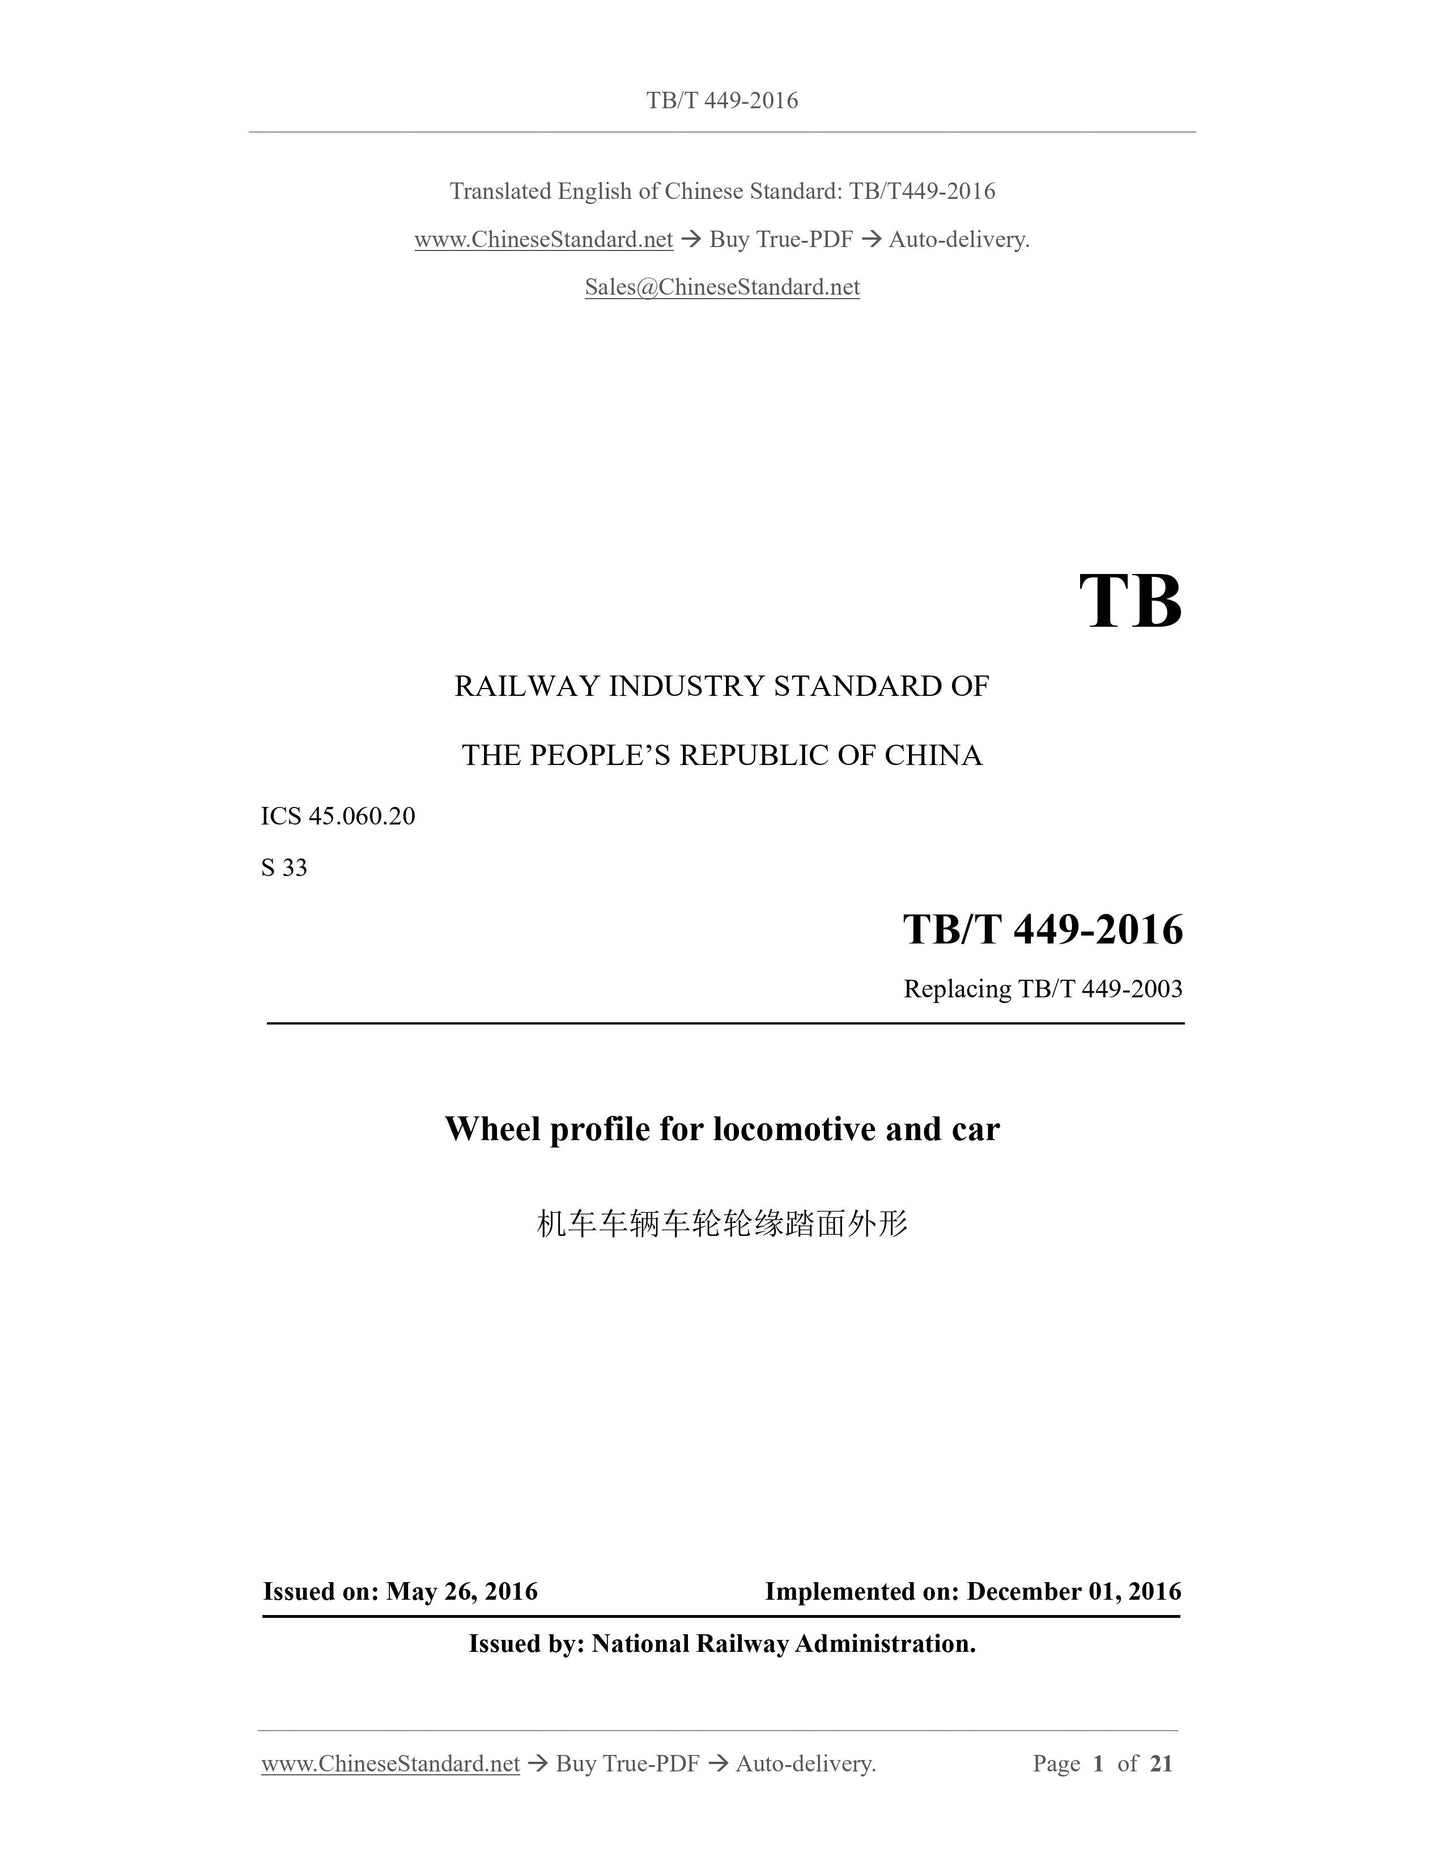 TB/T 449-2016 Page 1